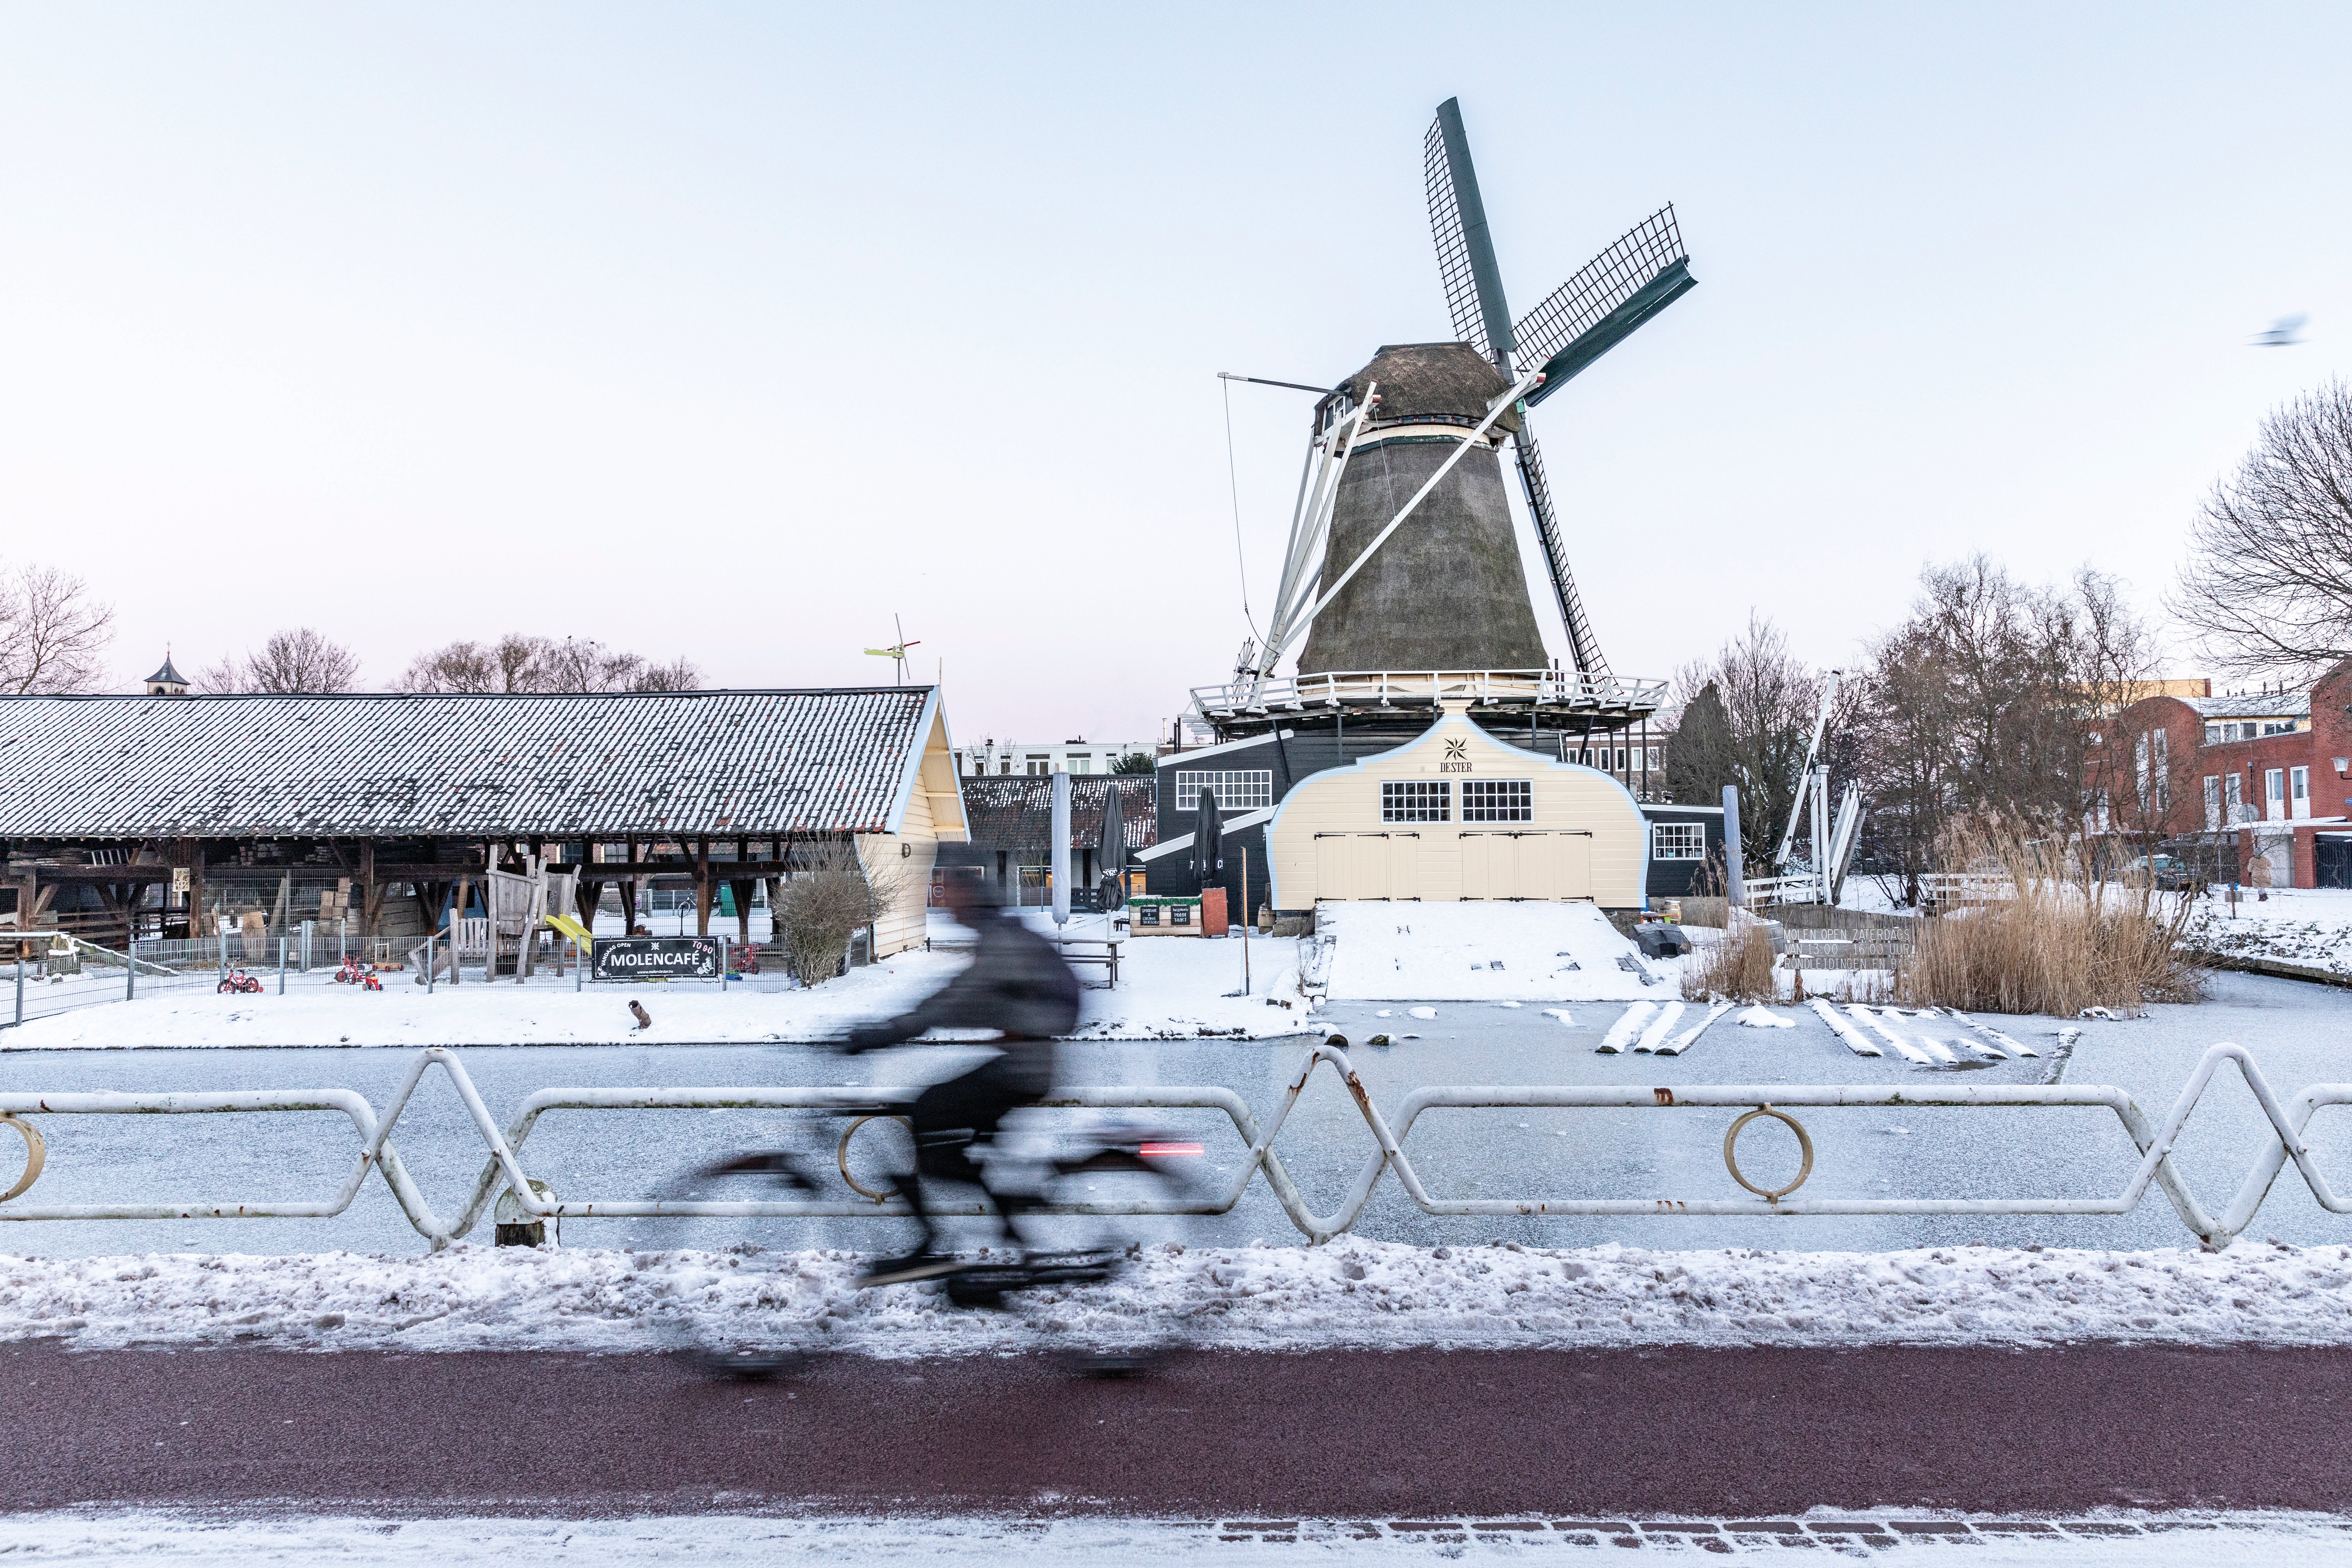 Other cities are learning from the Netherlands’ example when it comes to cycling